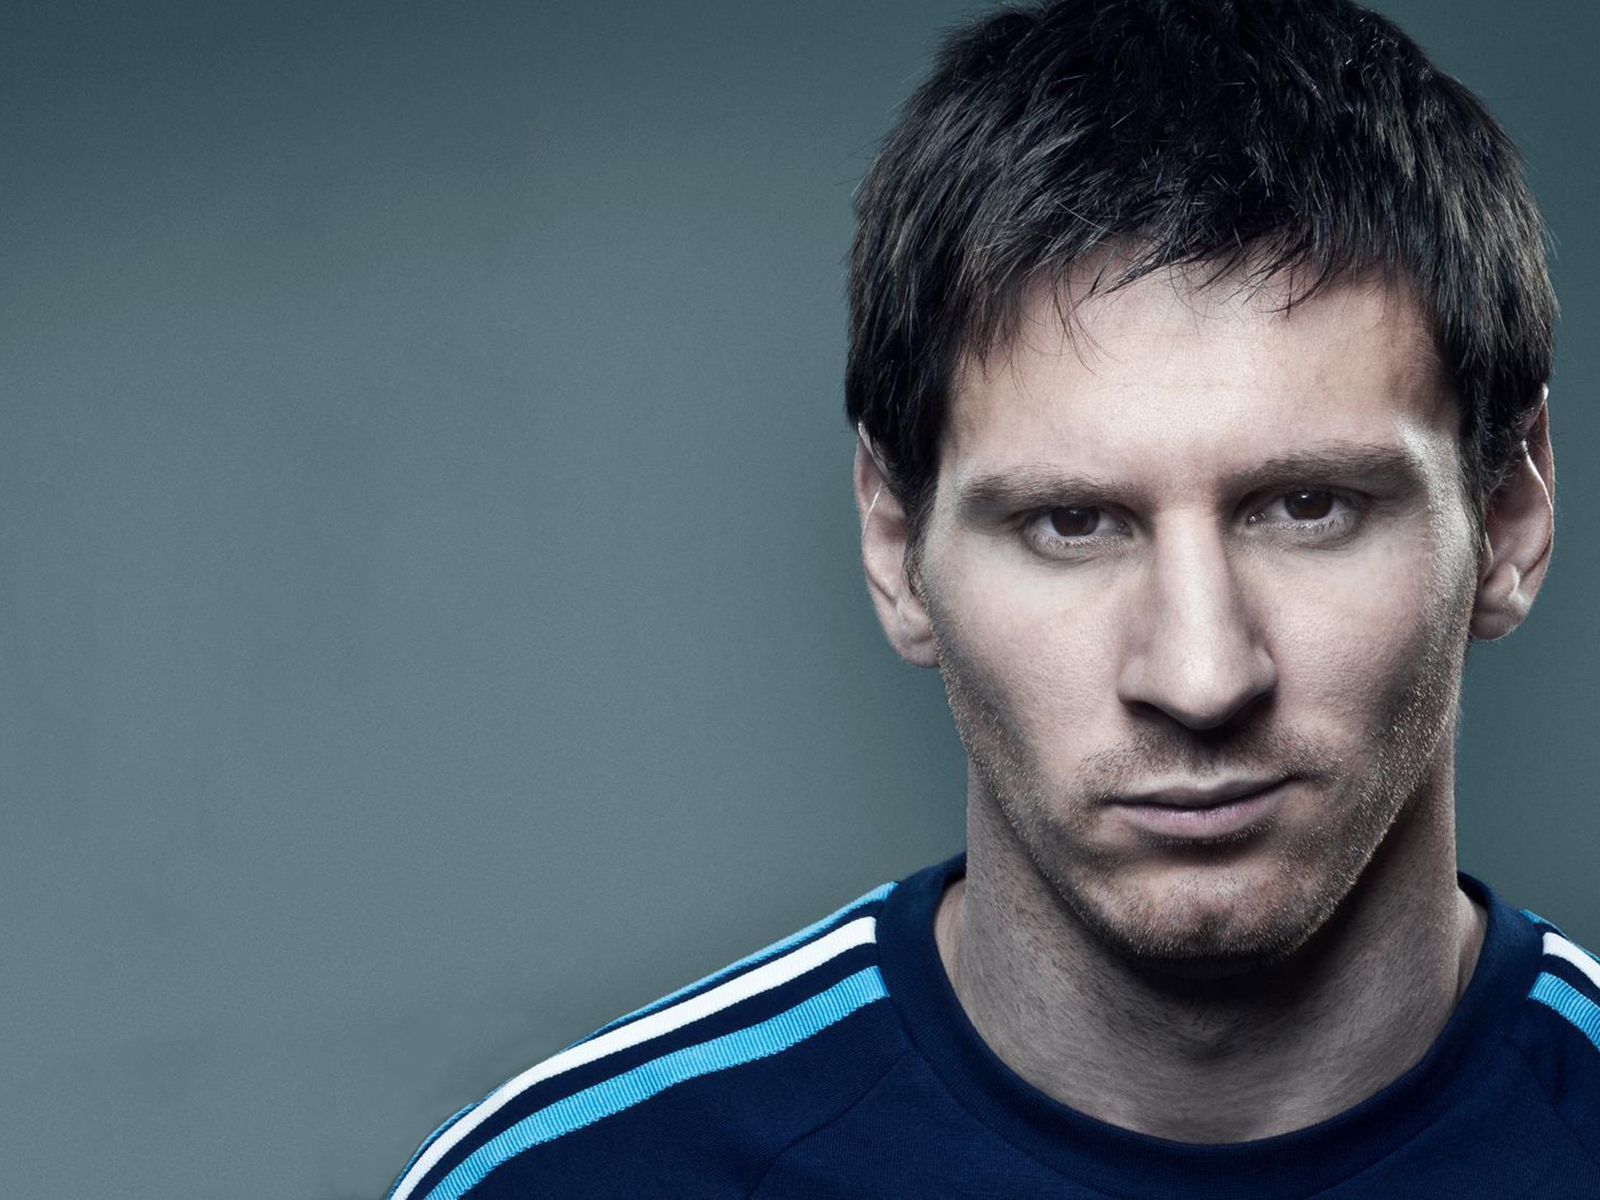 Messi Pose for 1600 x 1200 resolution